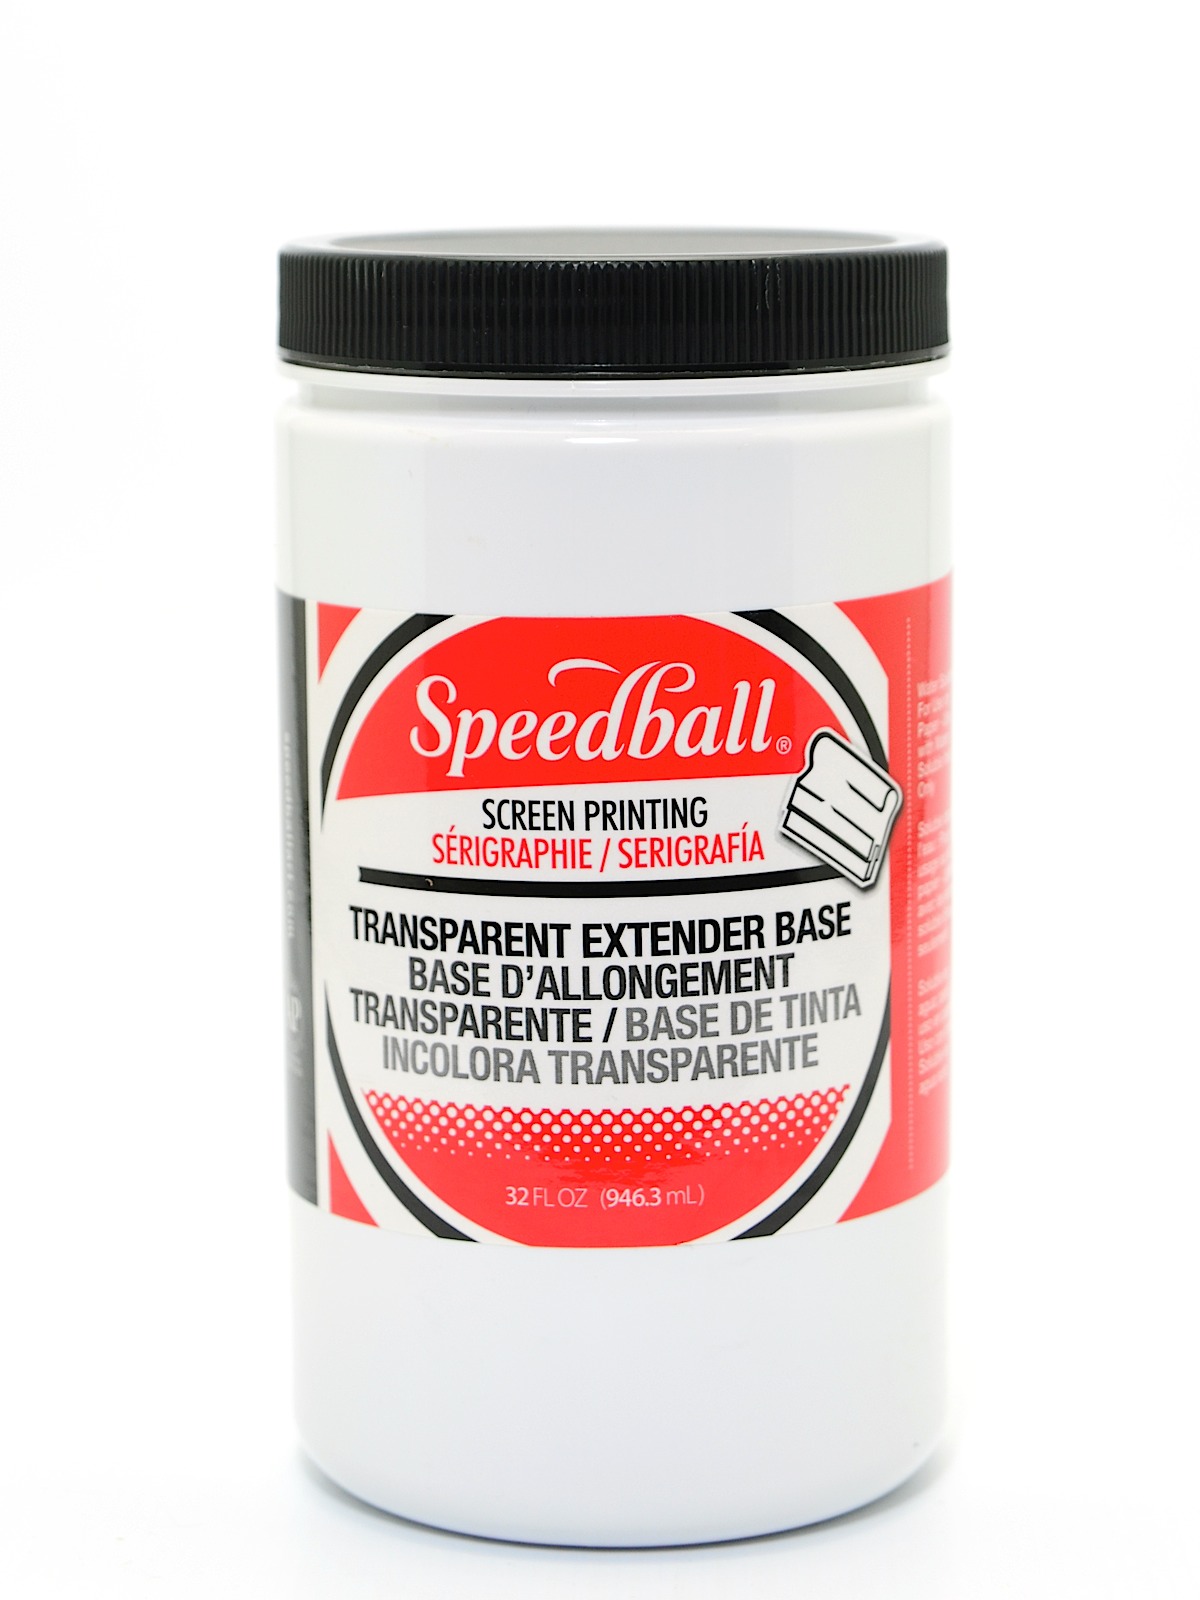 Water-soluble Transparent Extender Base 32 Oz.